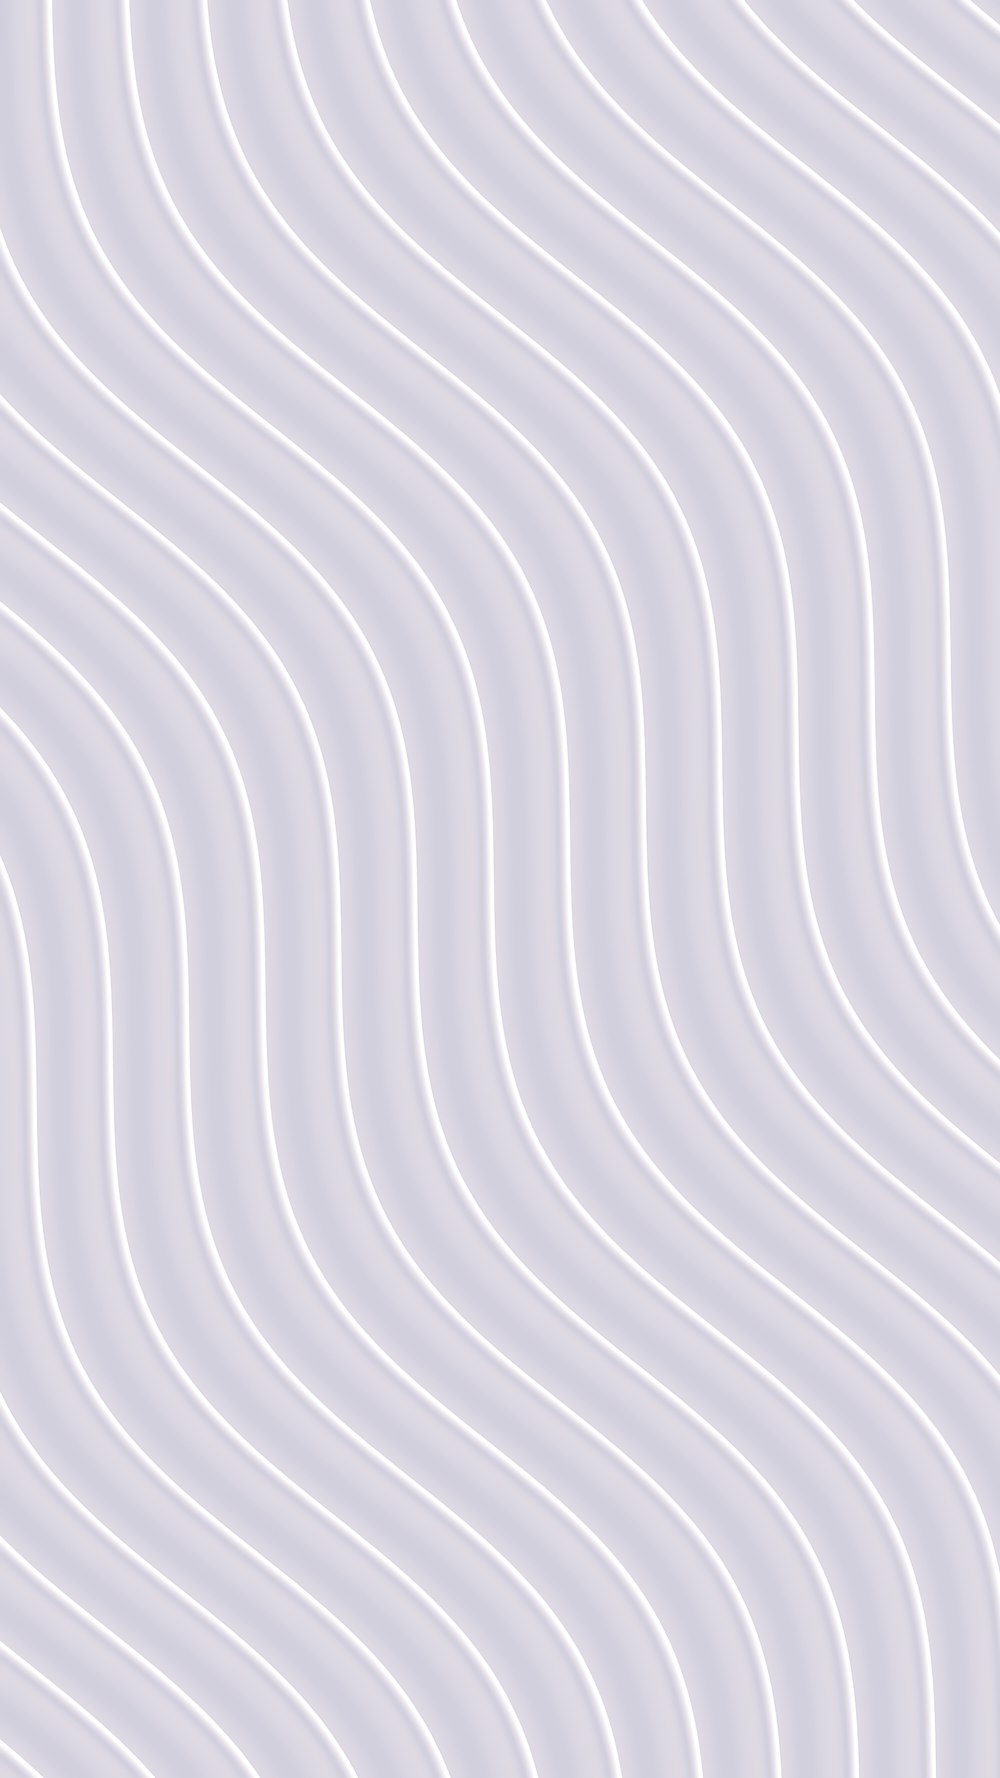 a white background with wavy lines